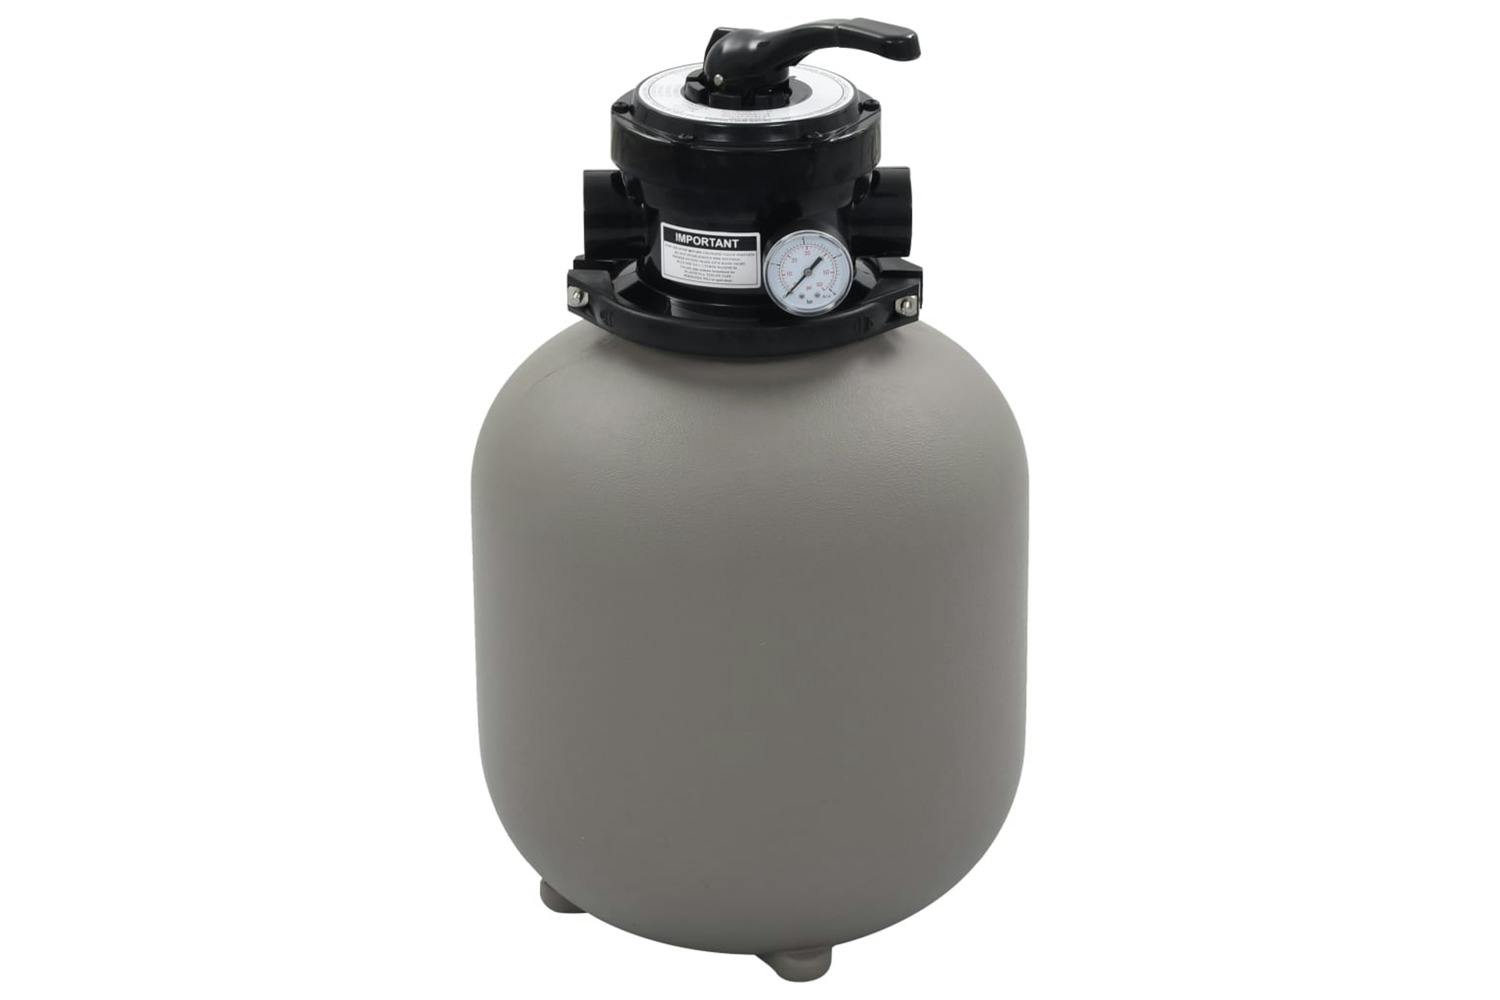 Vidaxl 91725 Pool Sand Filter With 4 Position Valve Grey 350 Mm